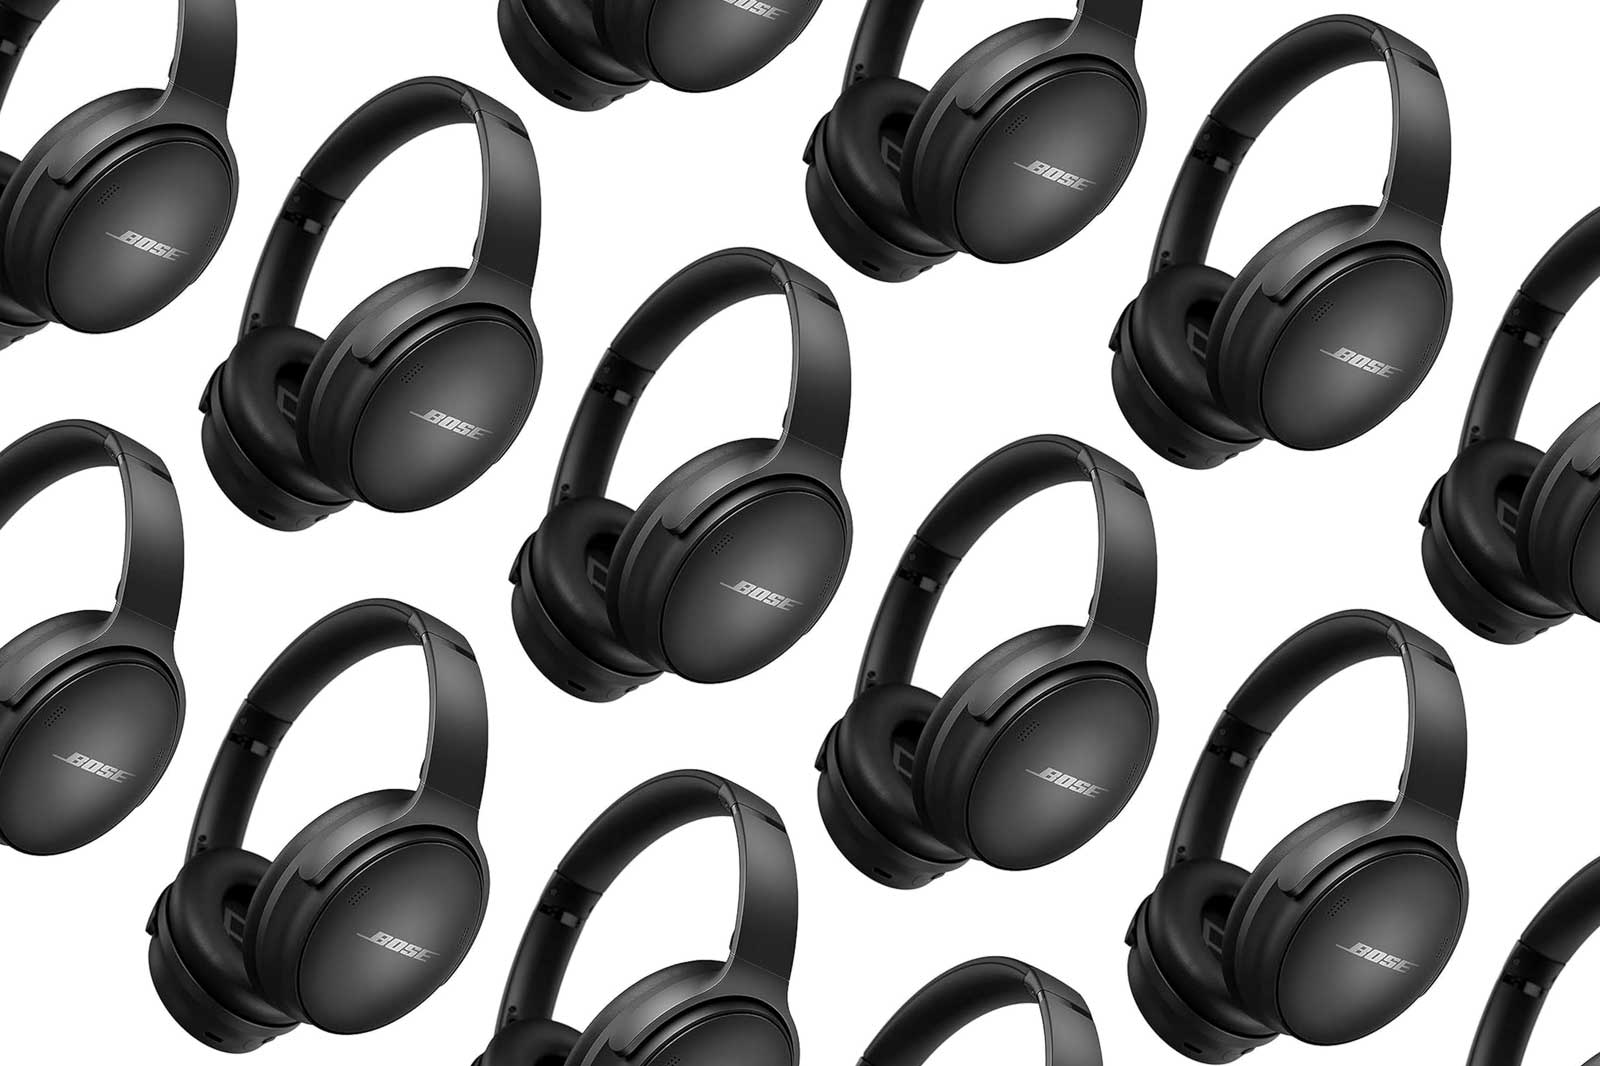 Get Bose noise-canceling headphones for their lowest prices ever